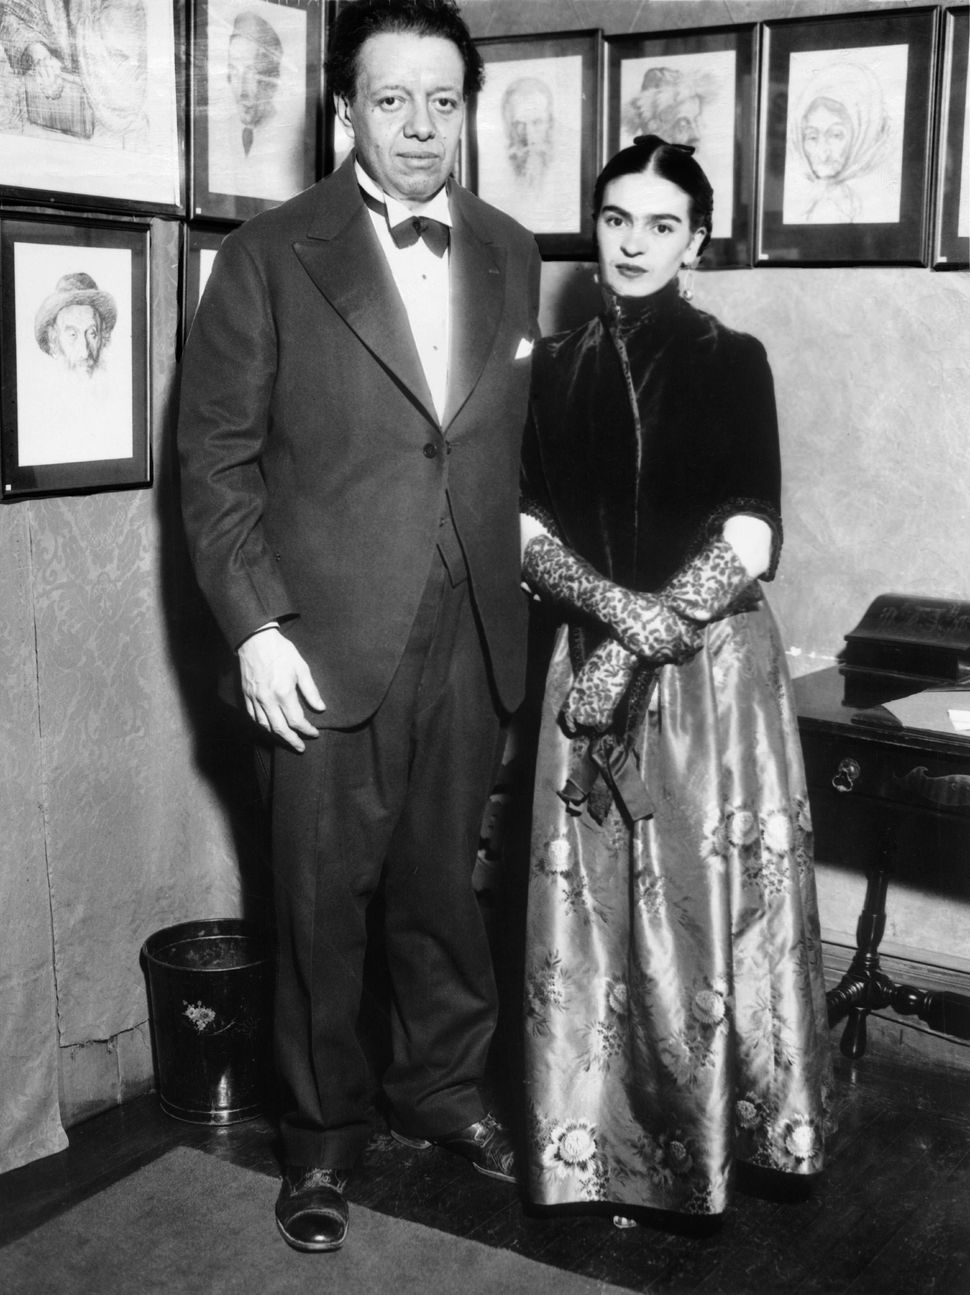 Be More Like Young Frida Kahlo Wearing A Menswear Suit In Her Family ... photo pic photo